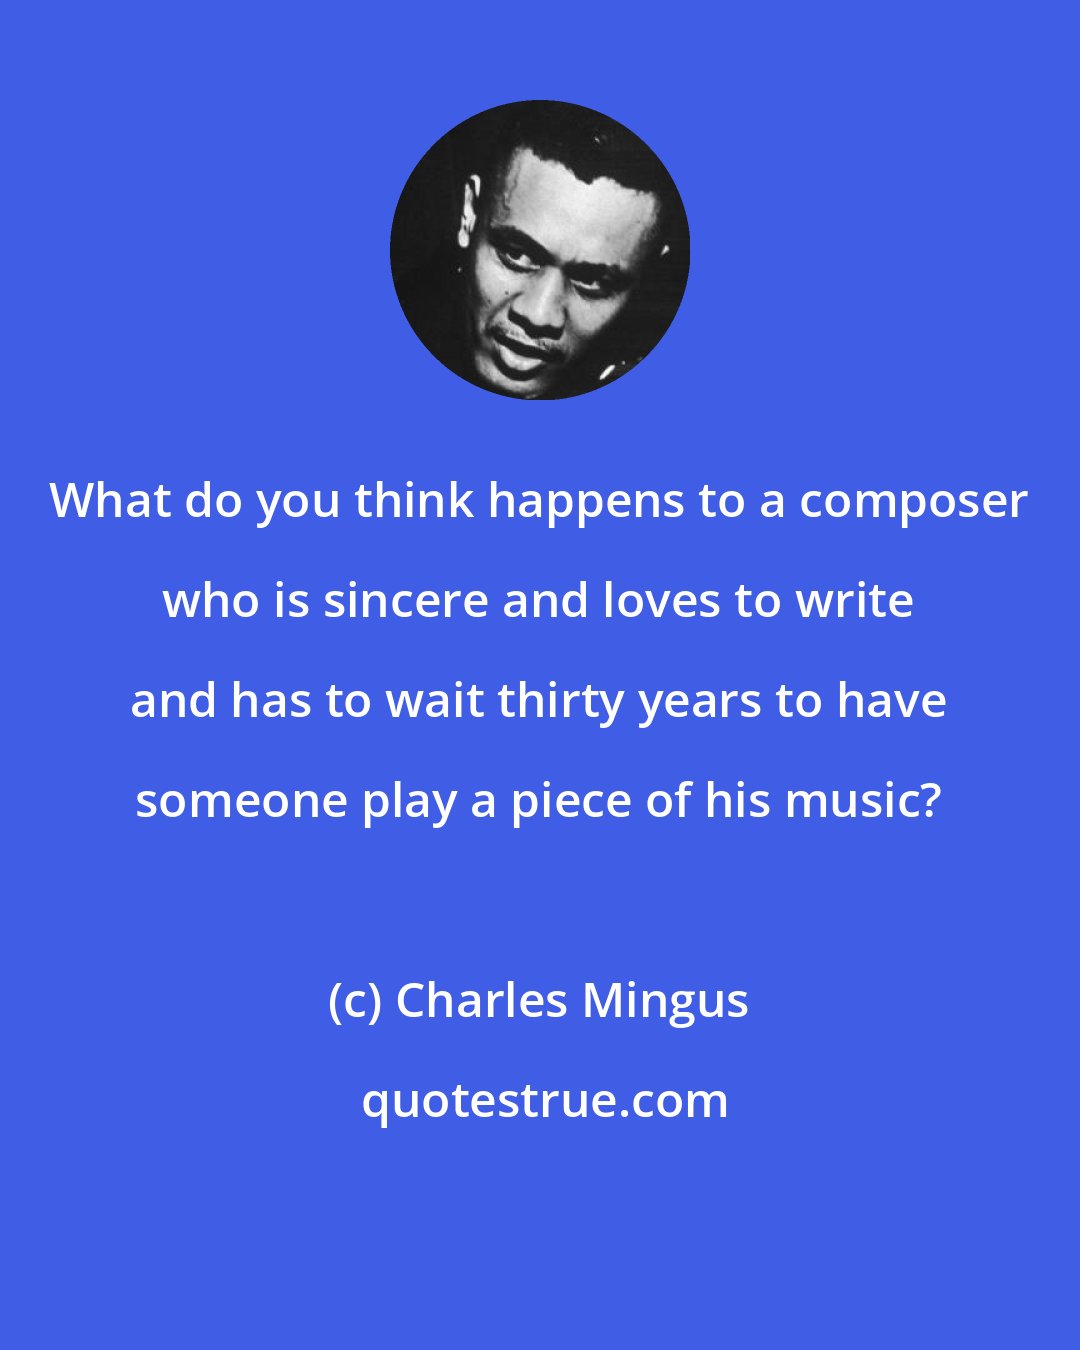 Charles Mingus: What do you think happens to a composer who is sincere and loves to write and has to wait thirty years to have someone play a piece of his music?